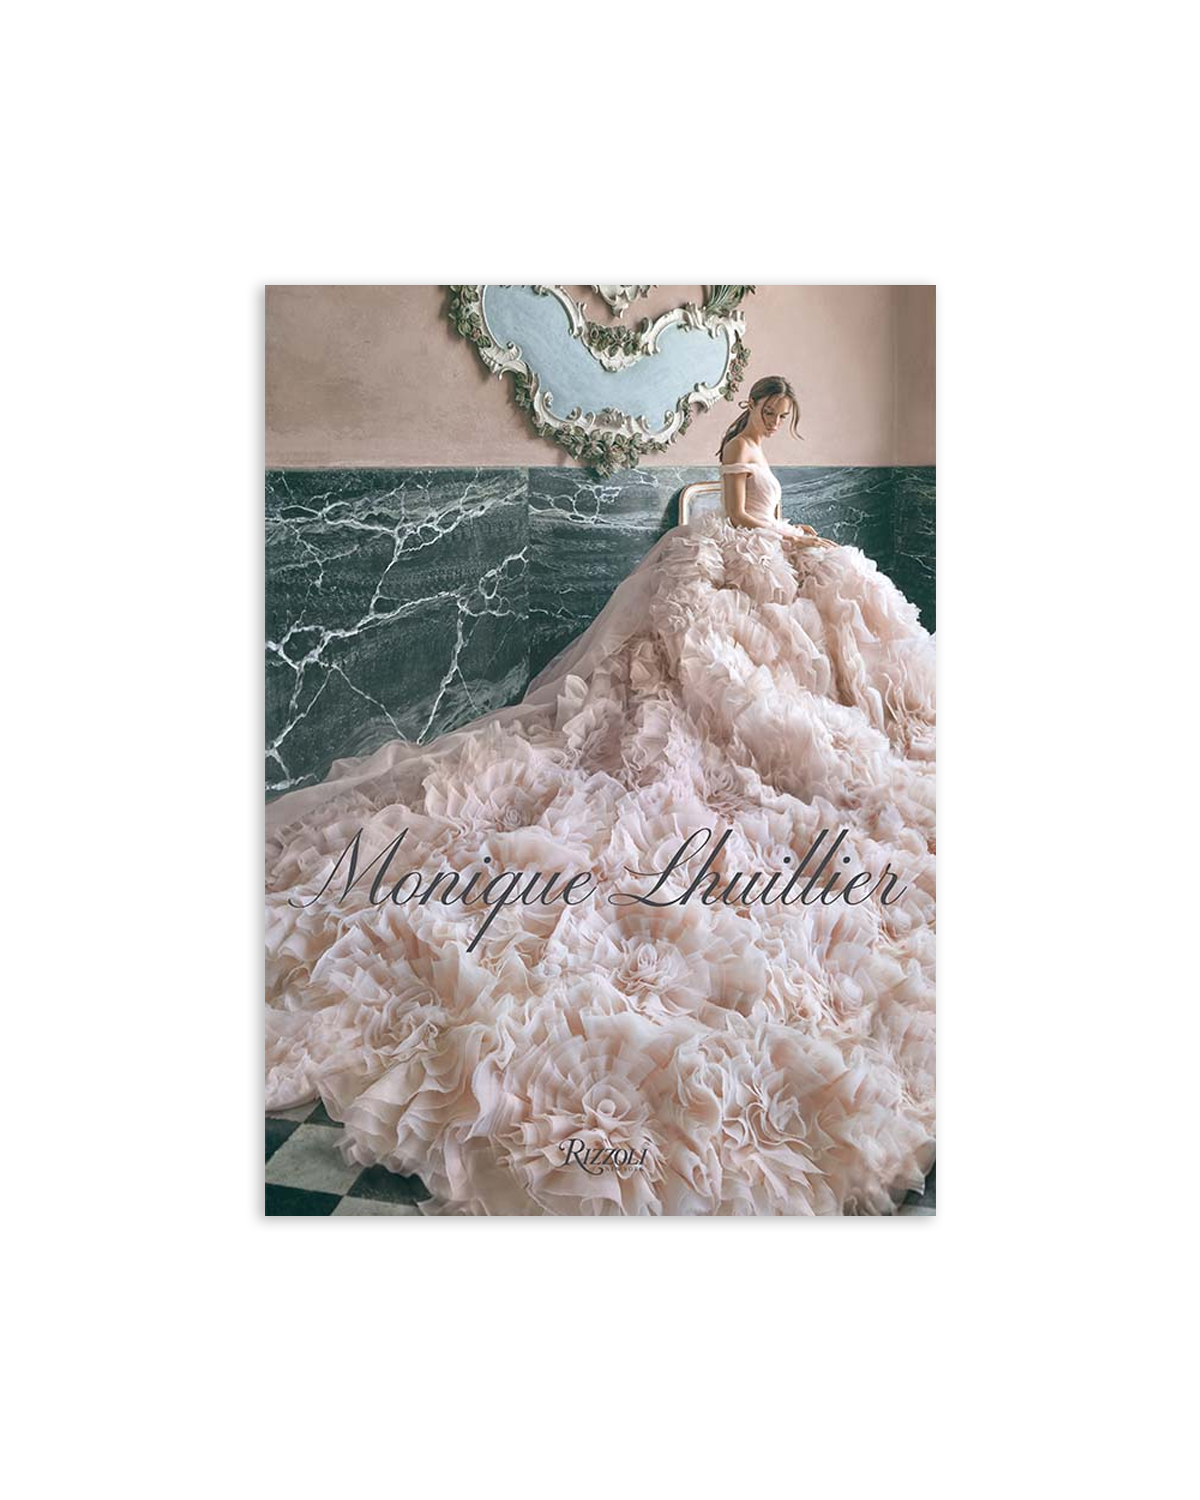 Monique Lhuillier: Dreaming of Fashion and Glamour